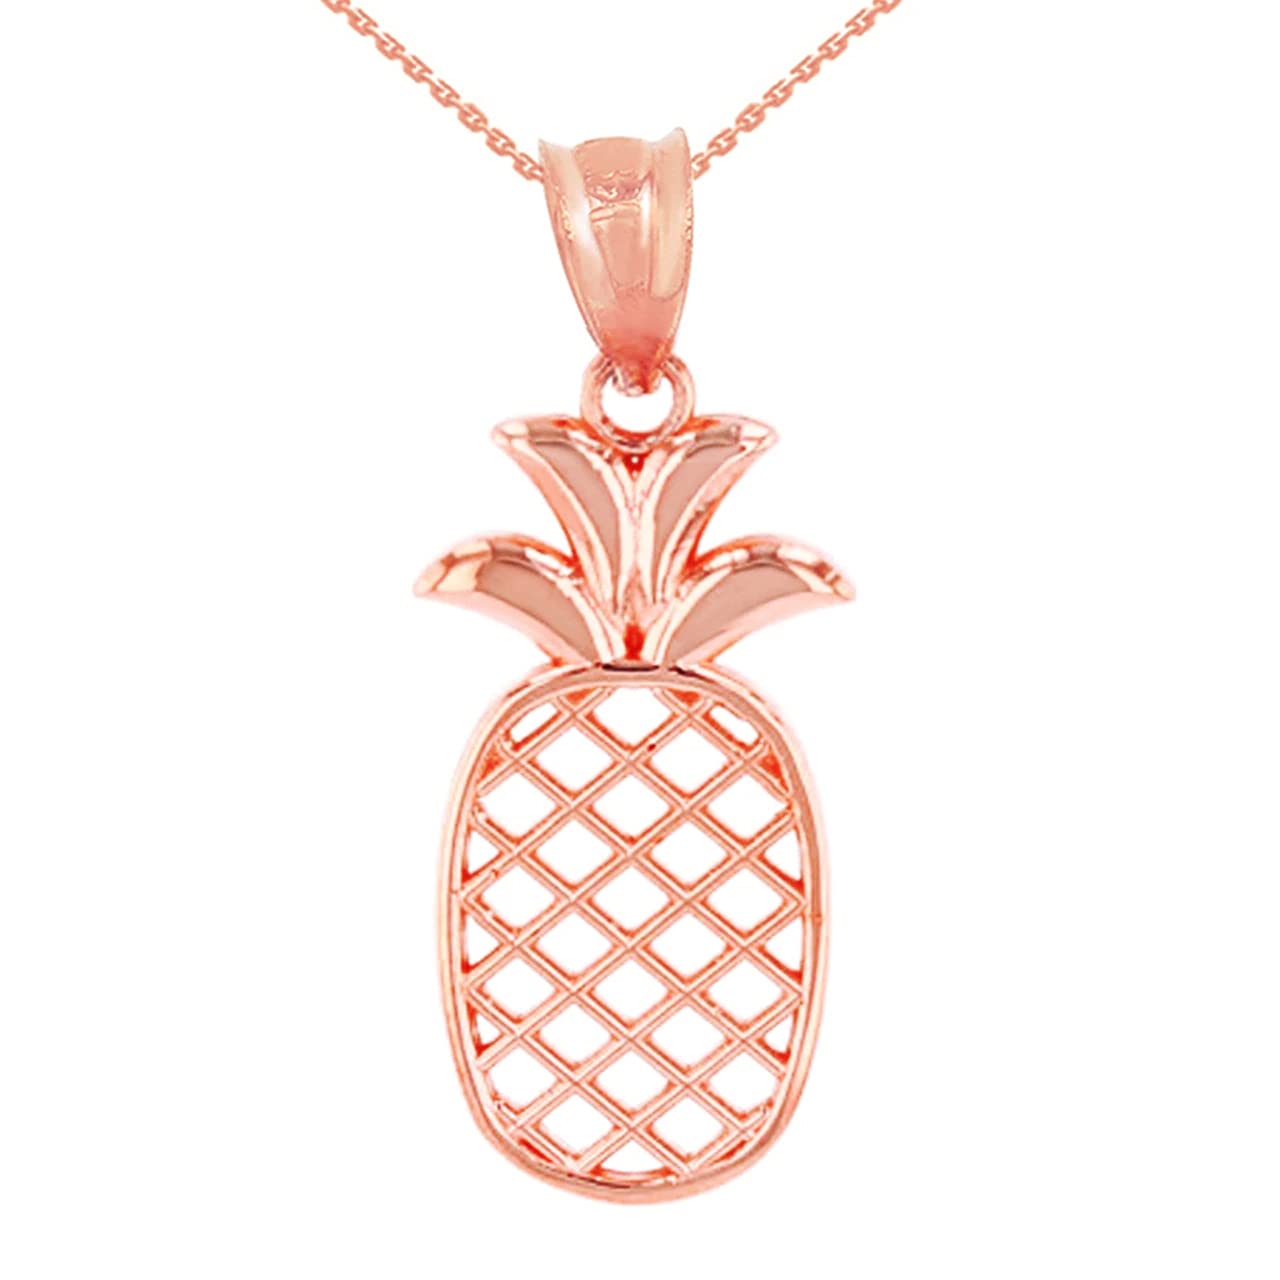 SOLID ROSE GOLD PINEAPPLE PENDANT NECKLACE - Gold Purity:: 10K, Pendant/Necklace Option: Pendant Only